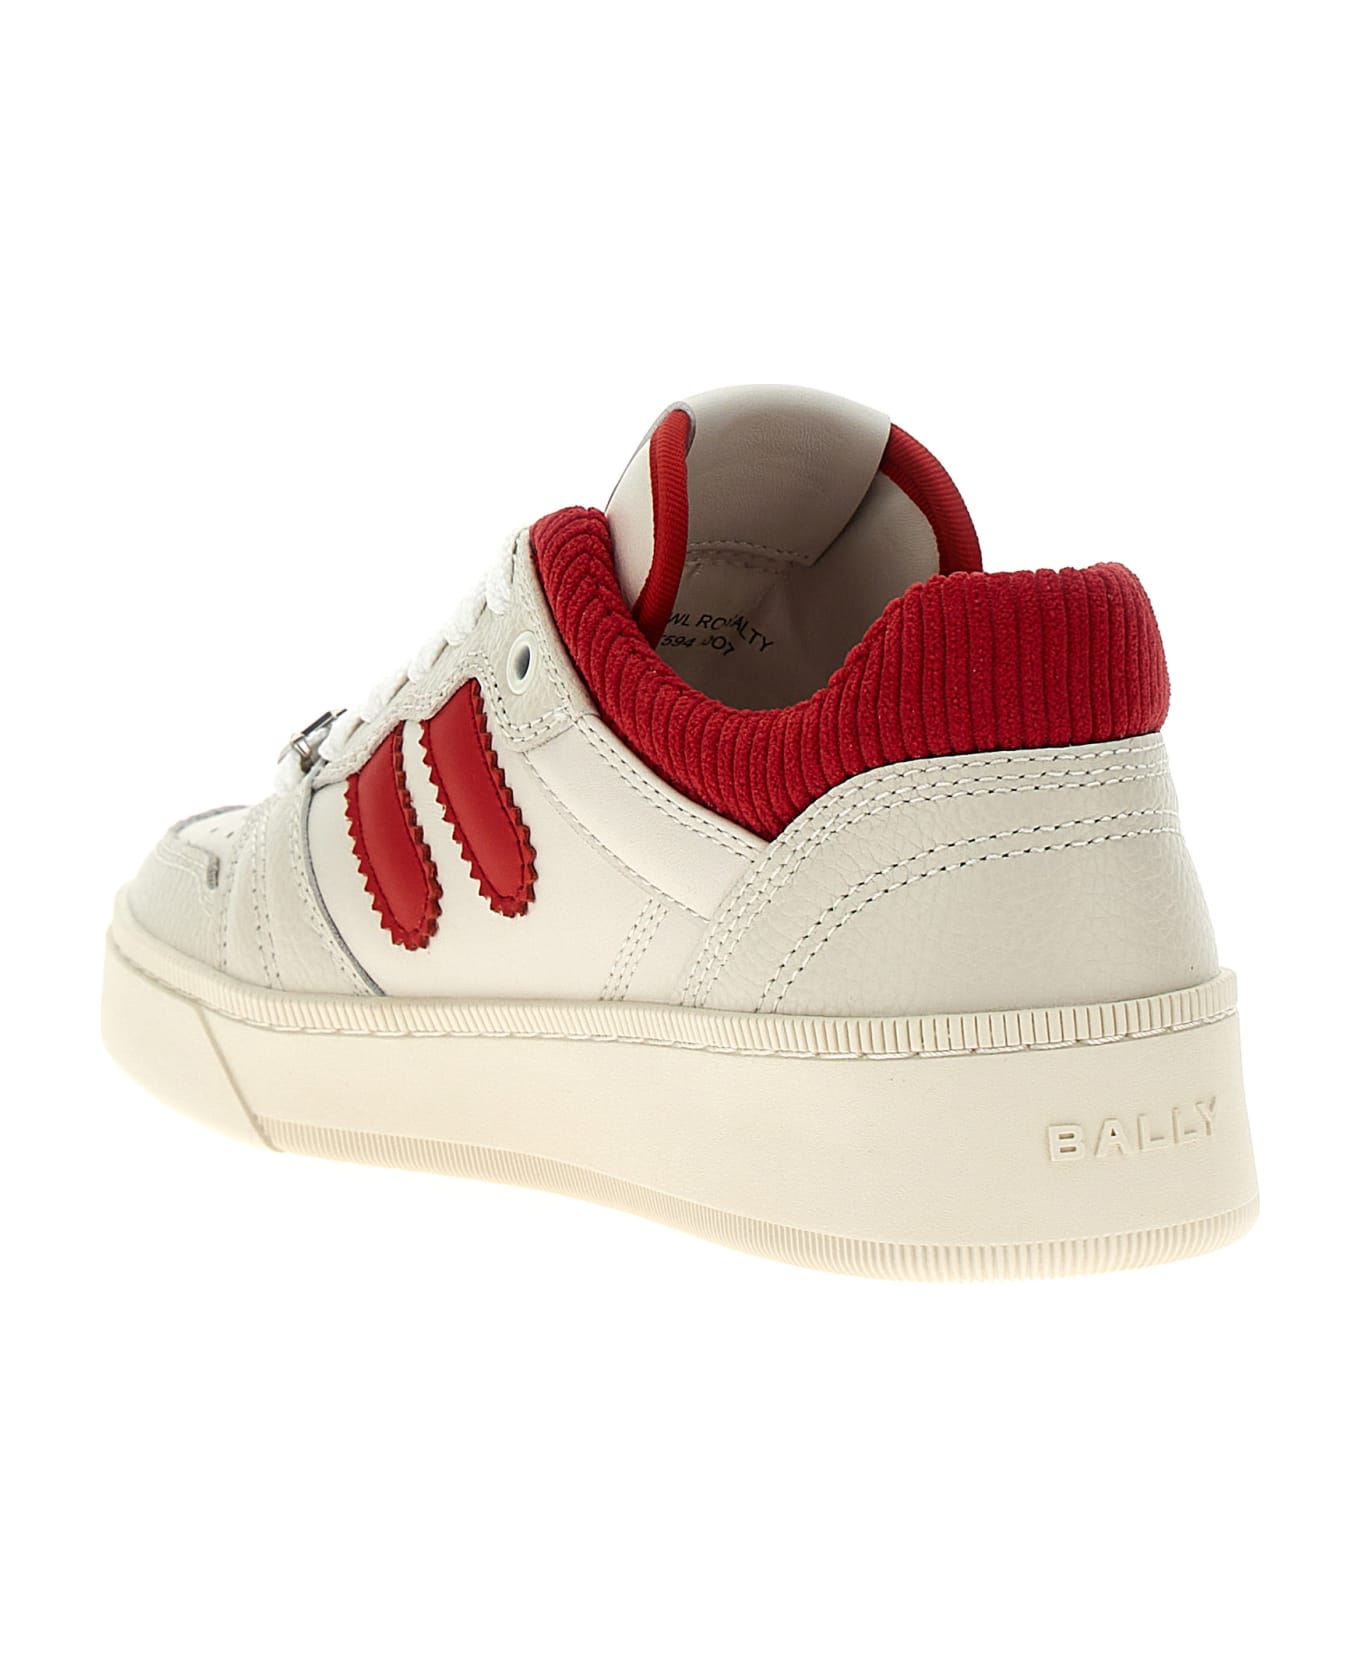 Bally 'royalty' Sneakers - Red